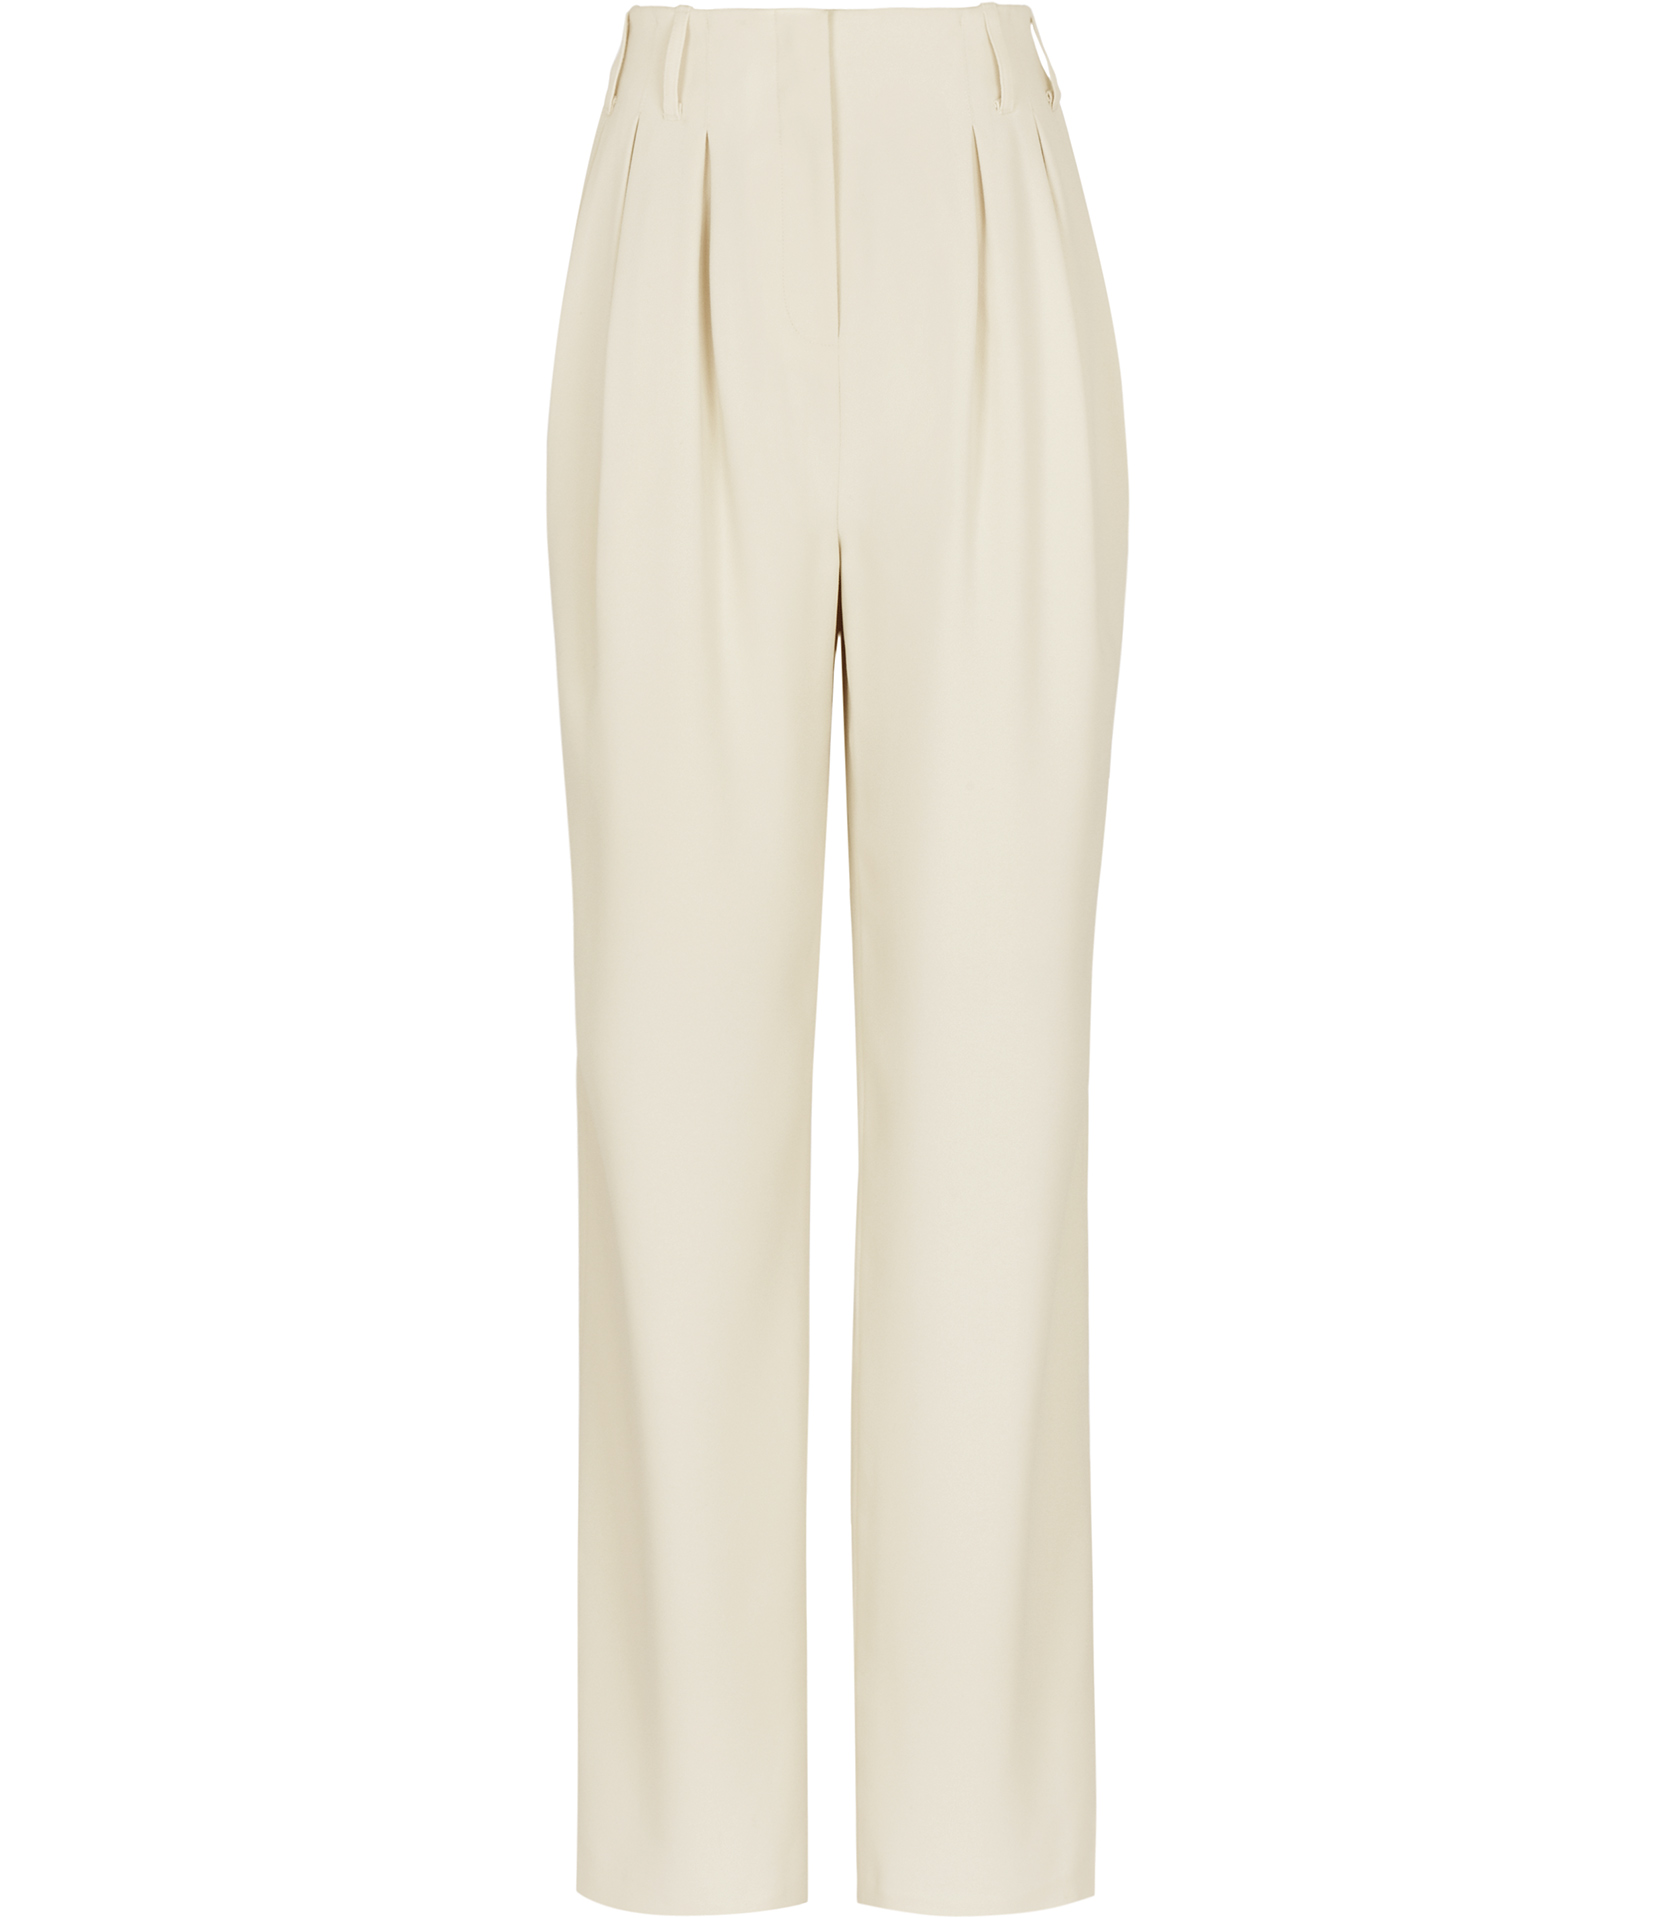 Lyst - Reiss Harperie Pleat Front Trousers in Natural